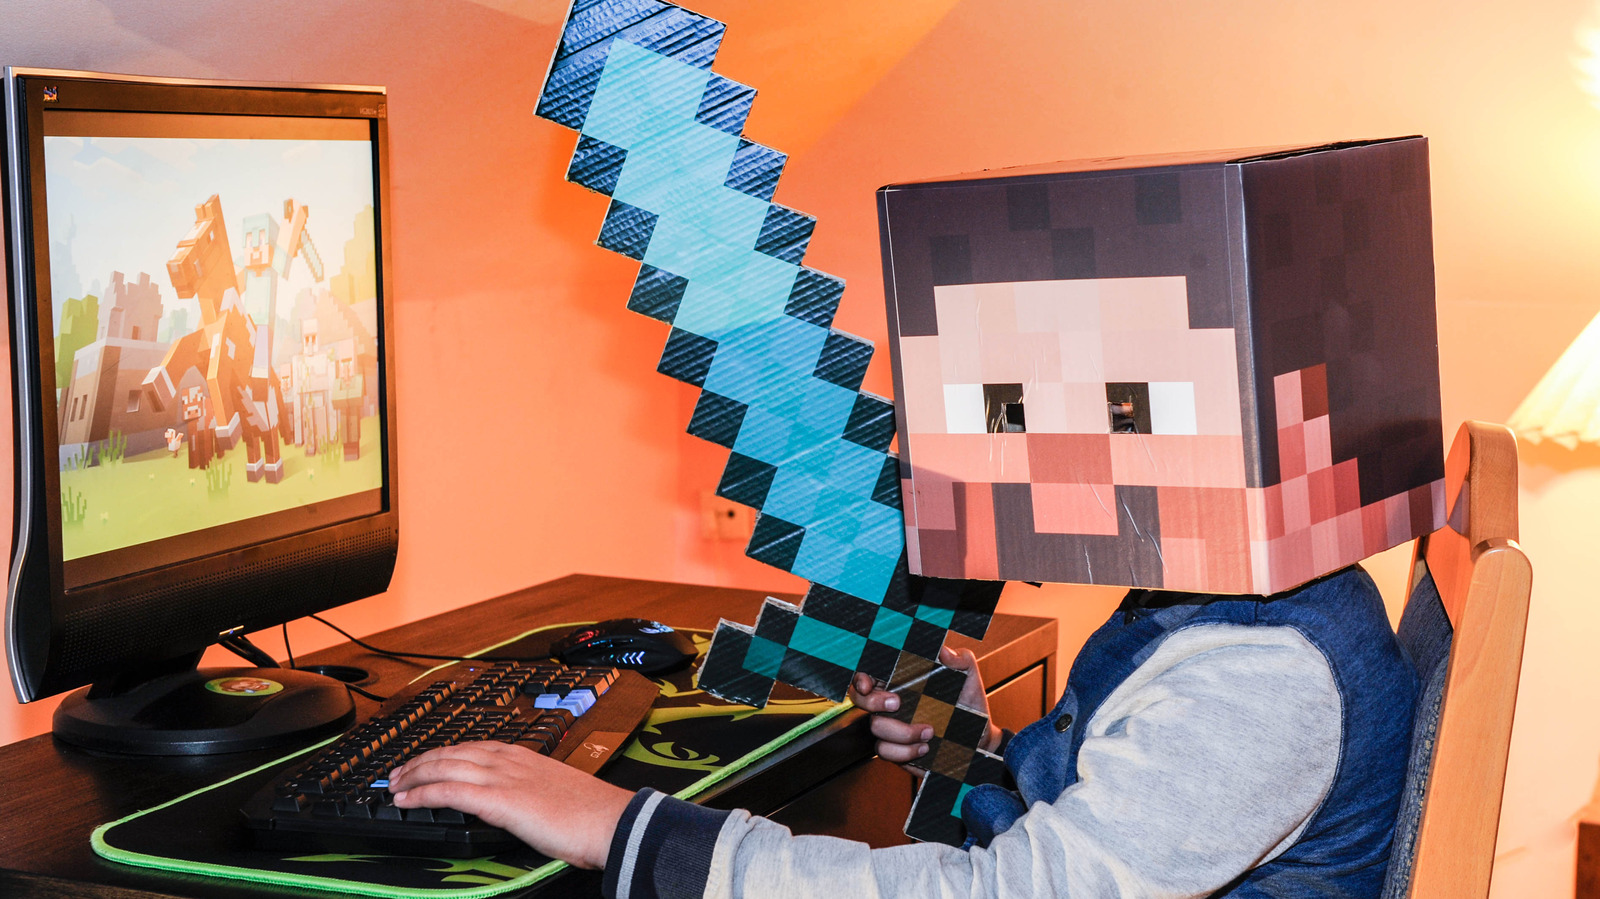 How To Create A Minecraft Account With Microsoft (2021) 